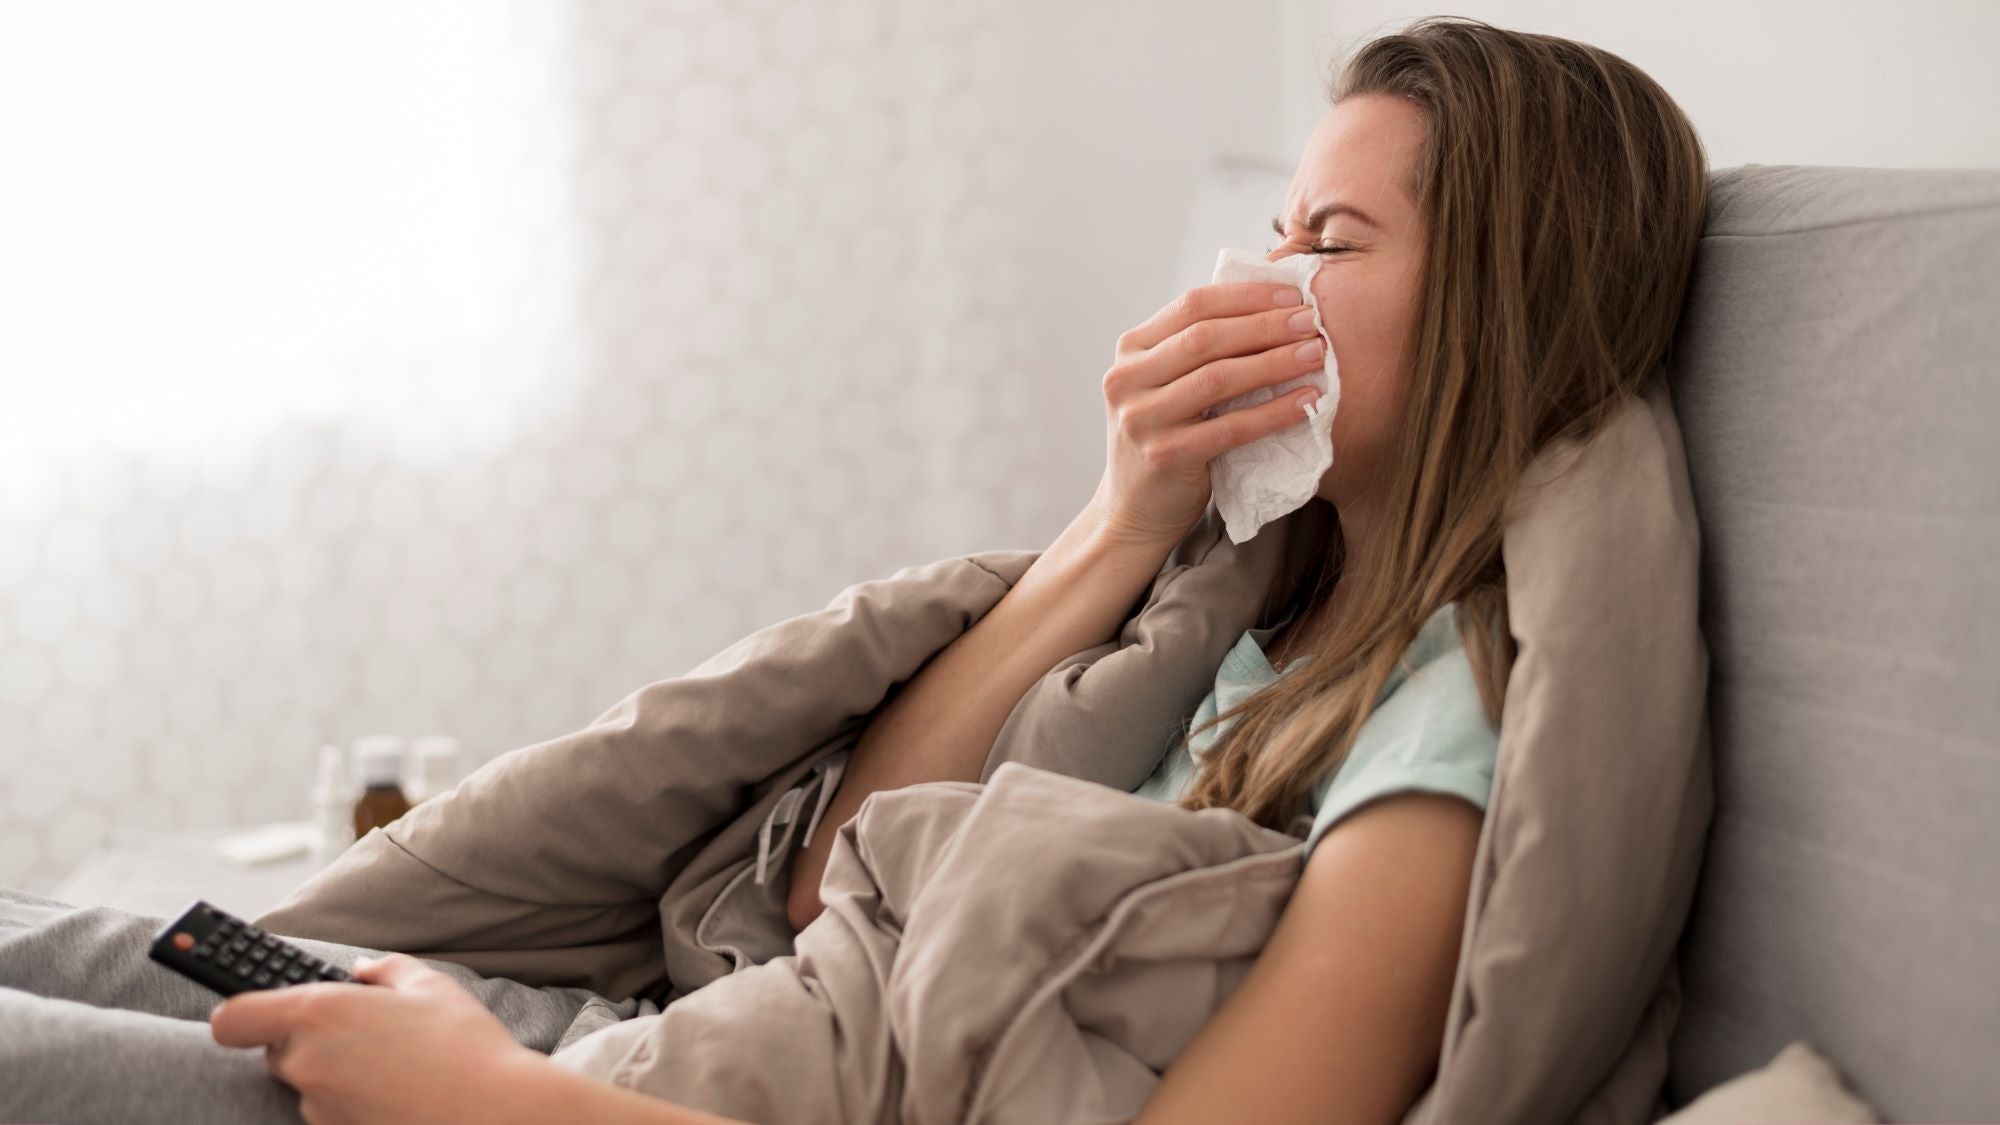 What is causing colds and viruses to appear particularly severe at this time?